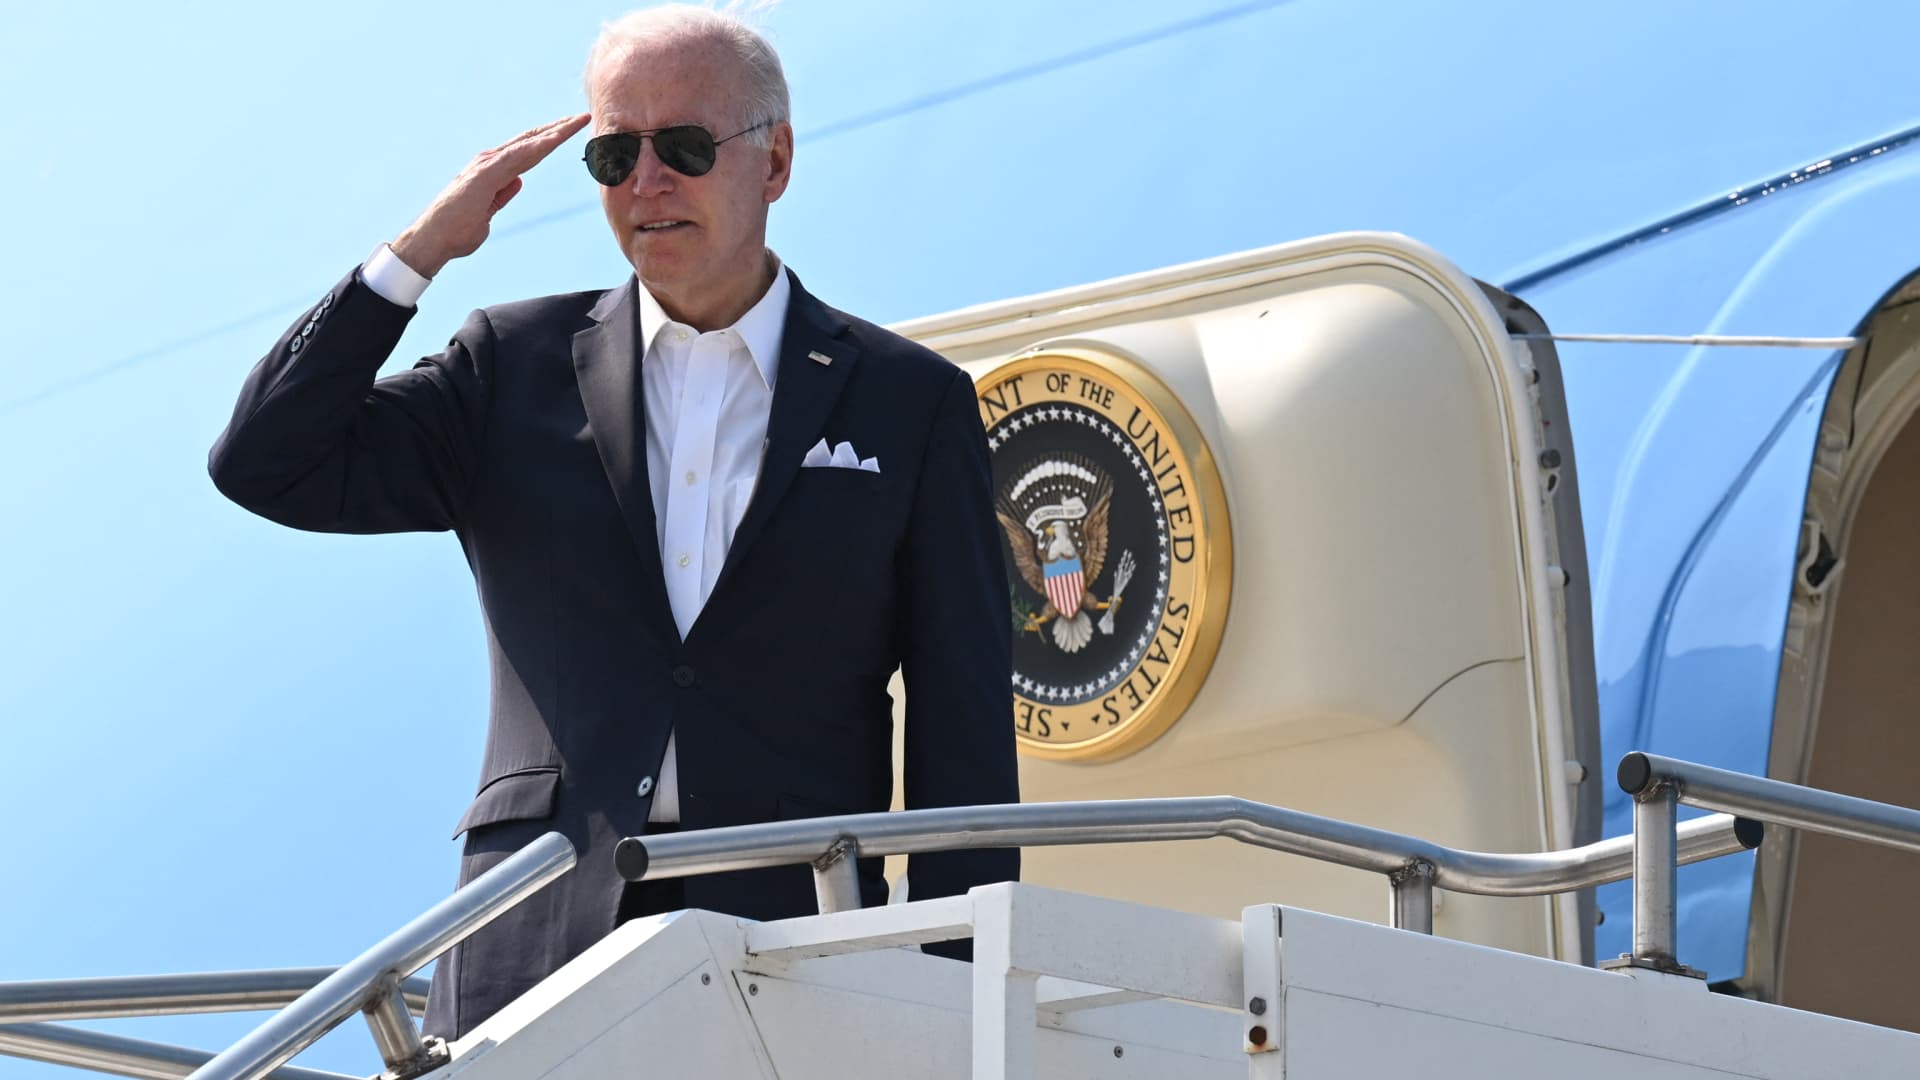 Borrowers are on edge as Biden decides how to act on student loan forgiveness